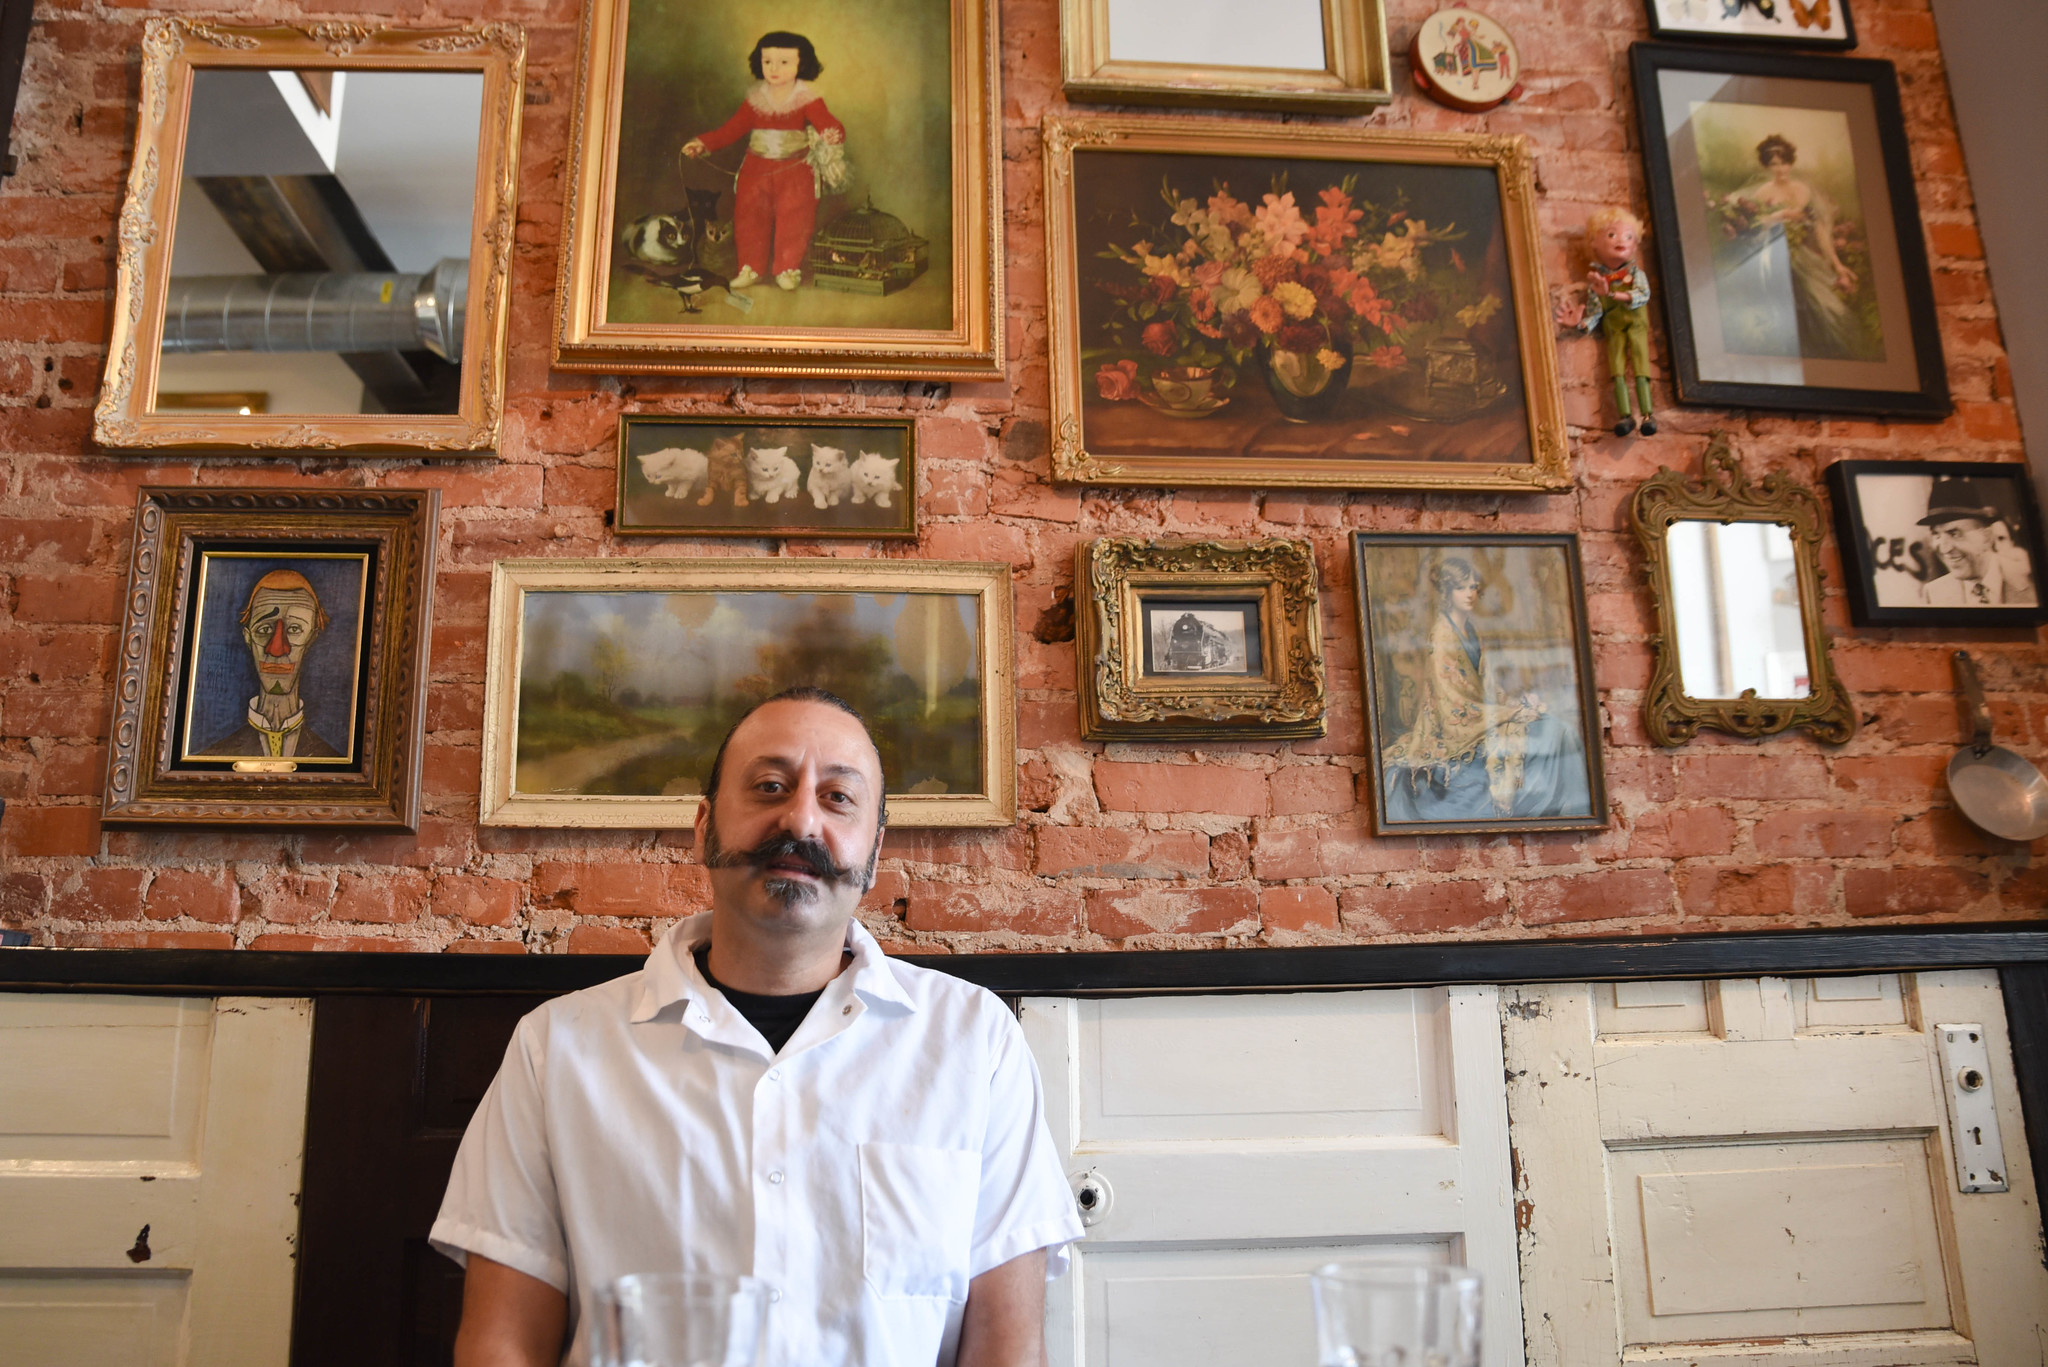 Owner of Stina, Chef Bobby, sits at a table in his restaurant. Behind him is a brick wall decorated with a gallery-style display of artwork. 